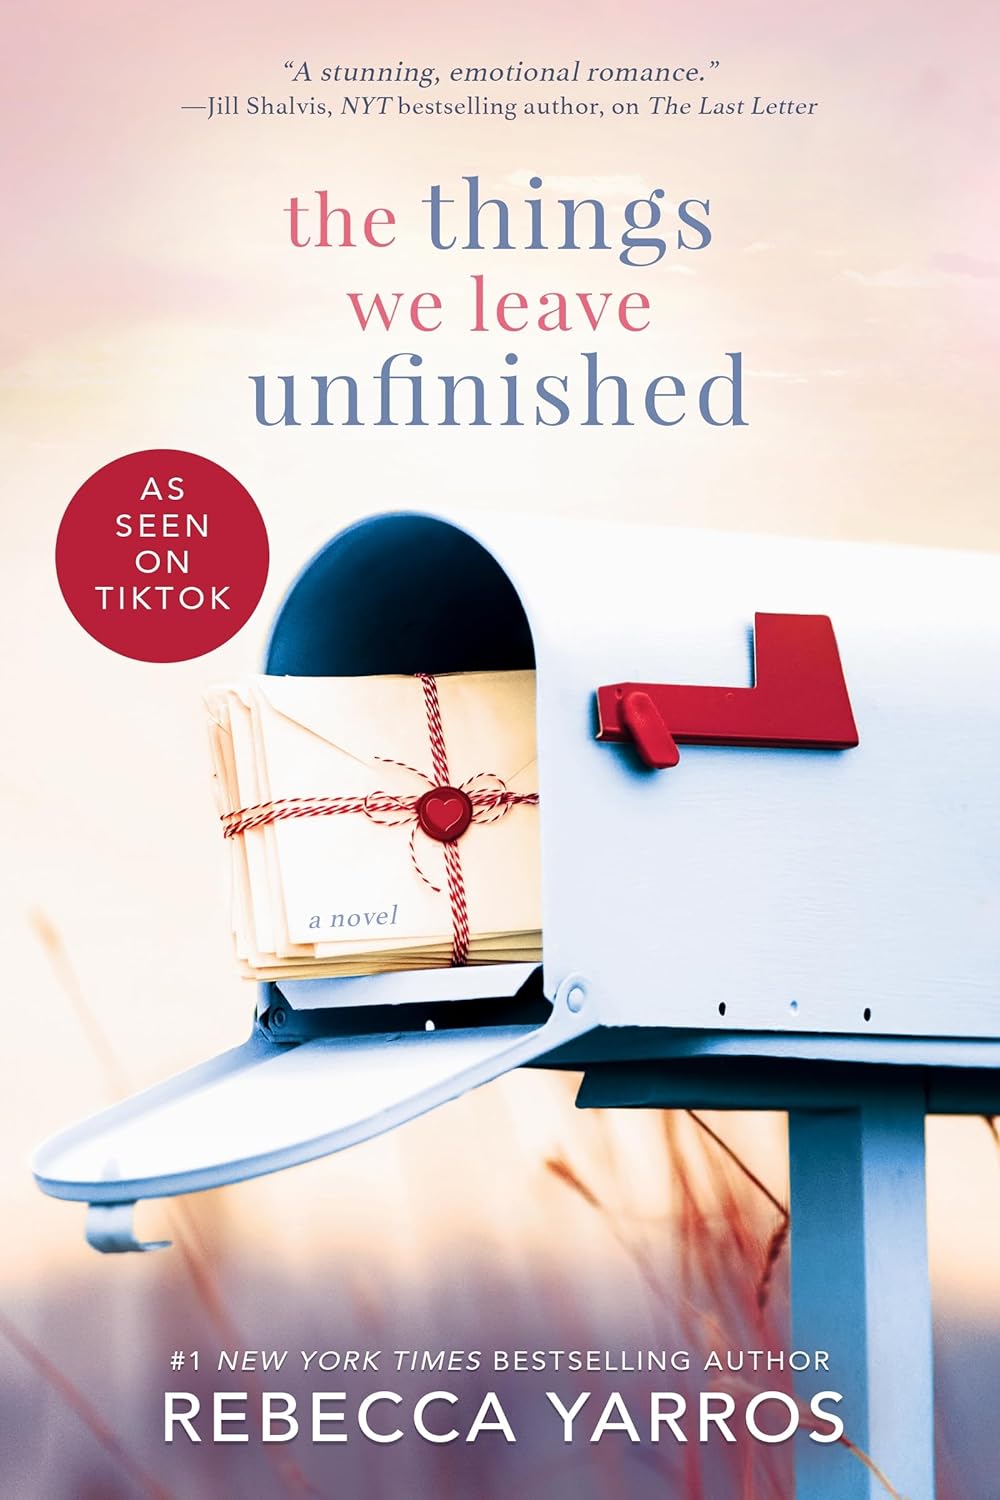 The Things We Leave Unfinished Book by Rebecca Yarros